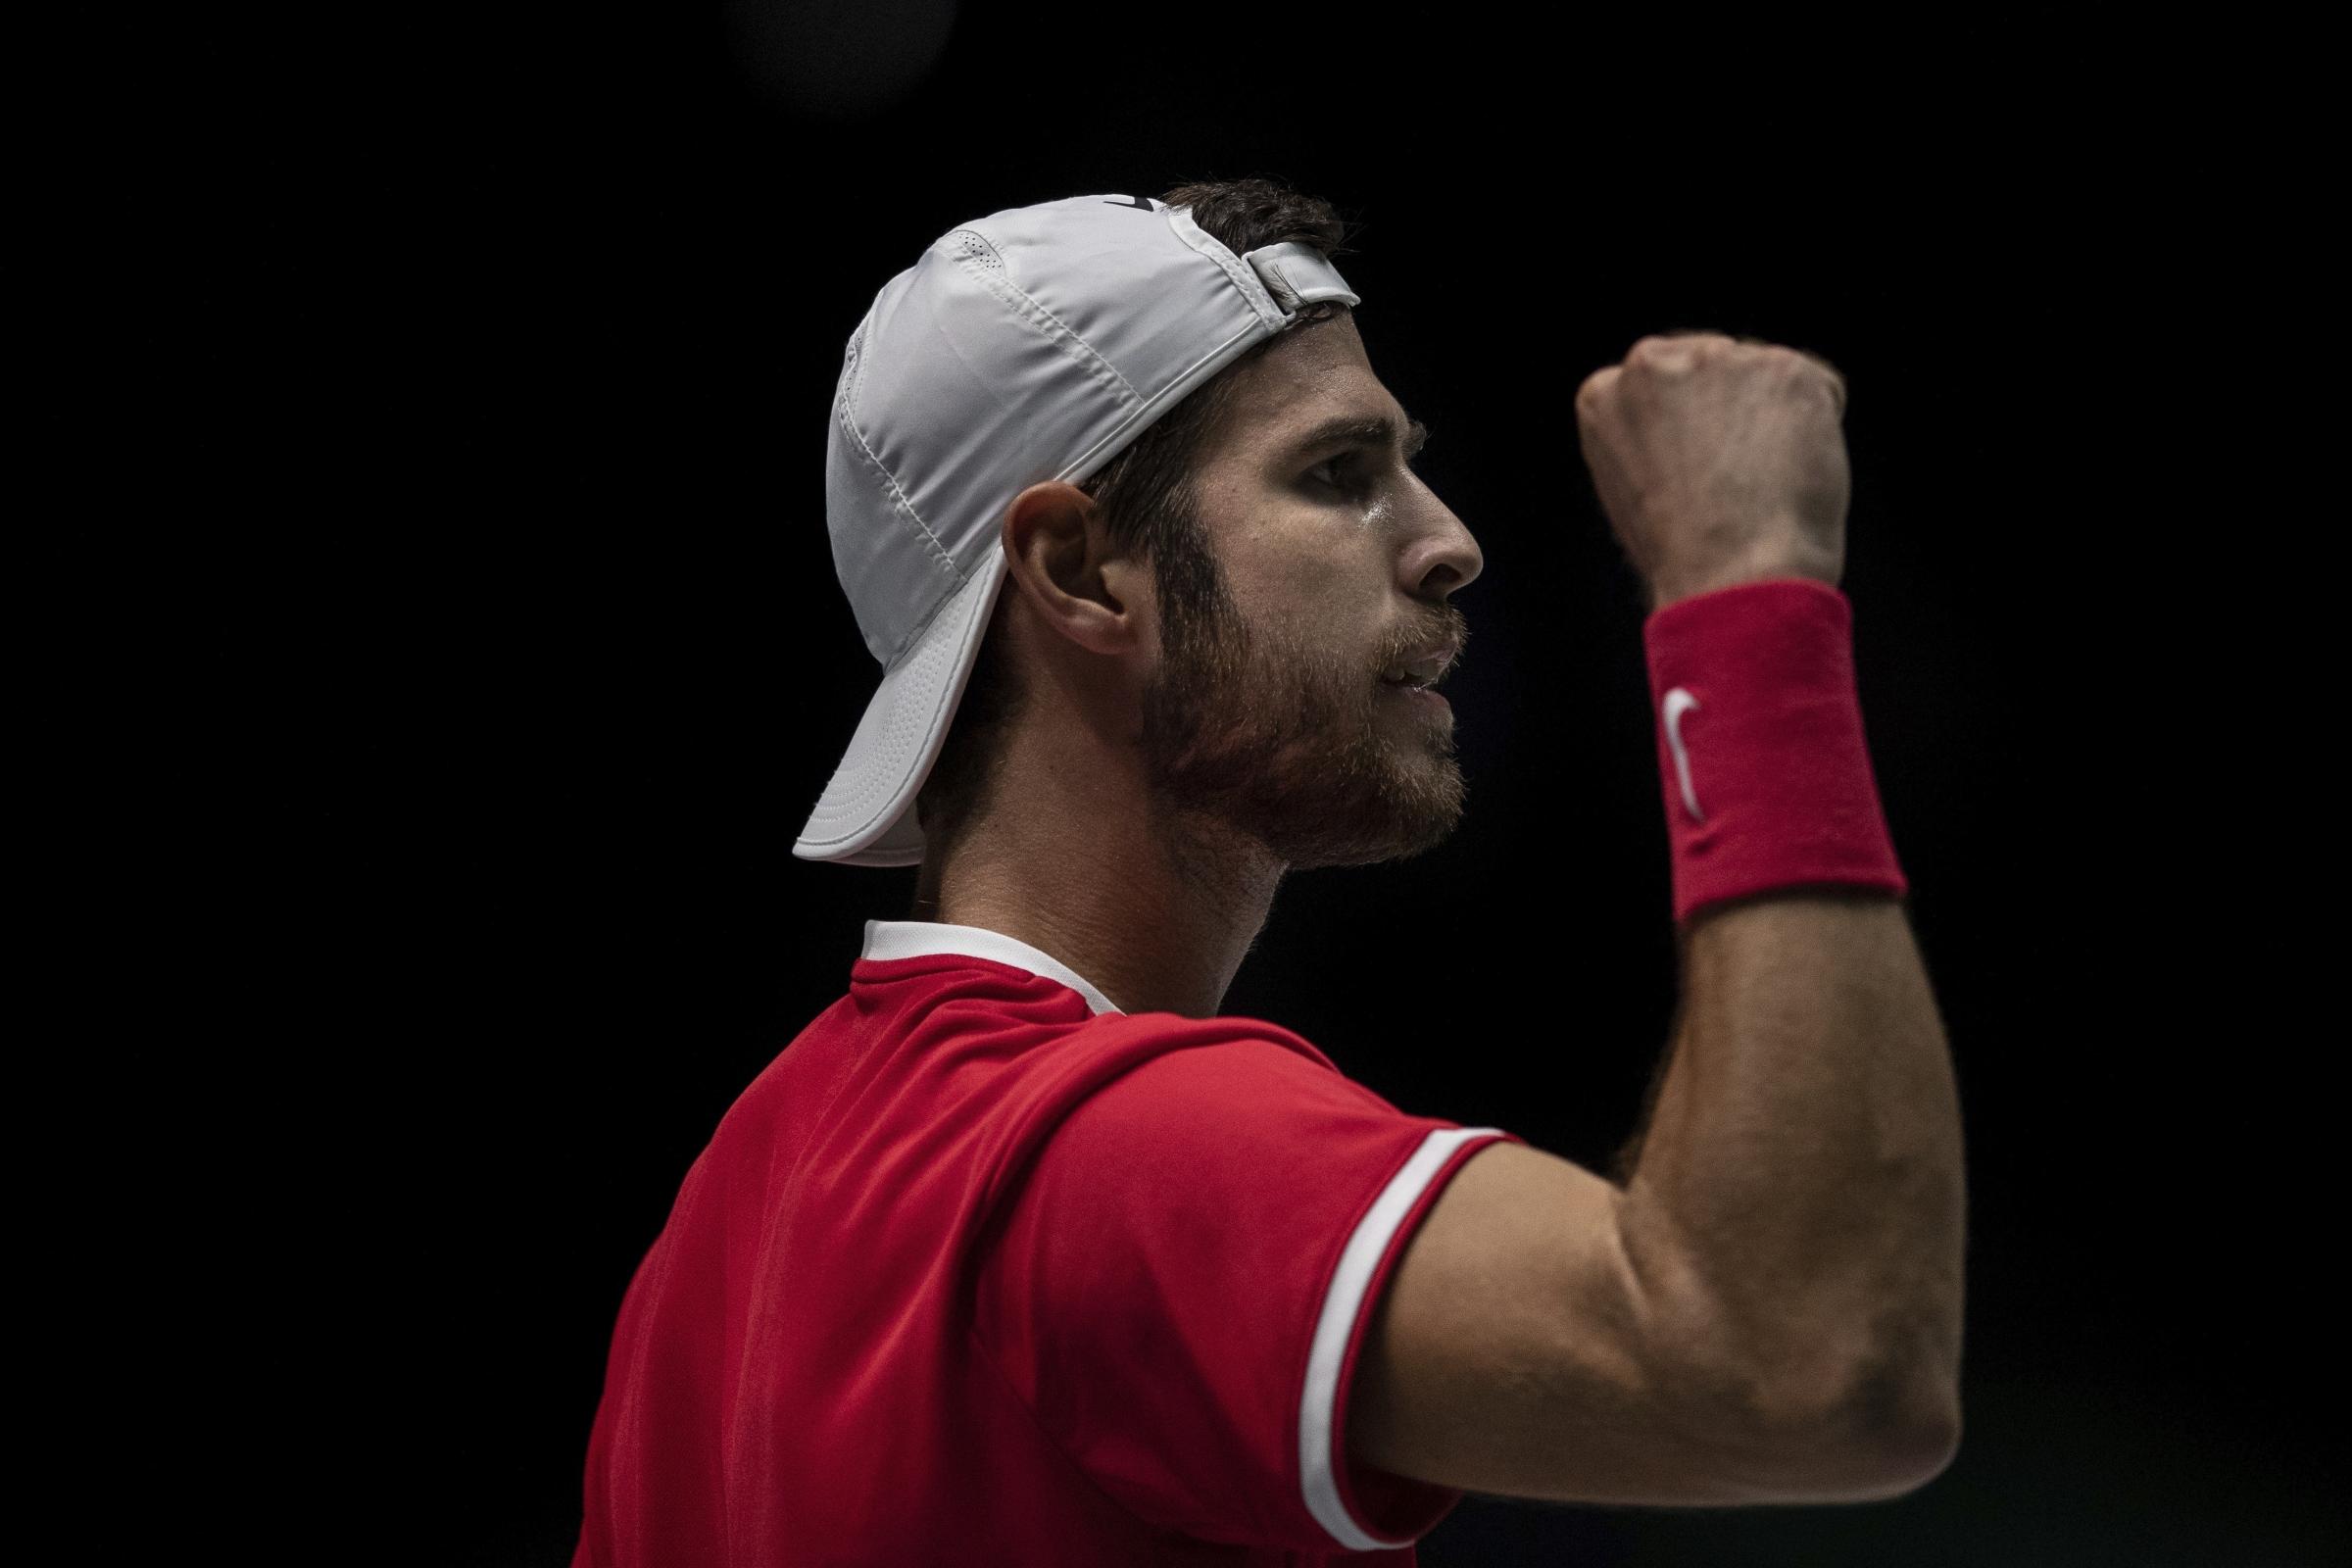 New-look Davis Cup launches with few hiccups in Madrid - Dudley News